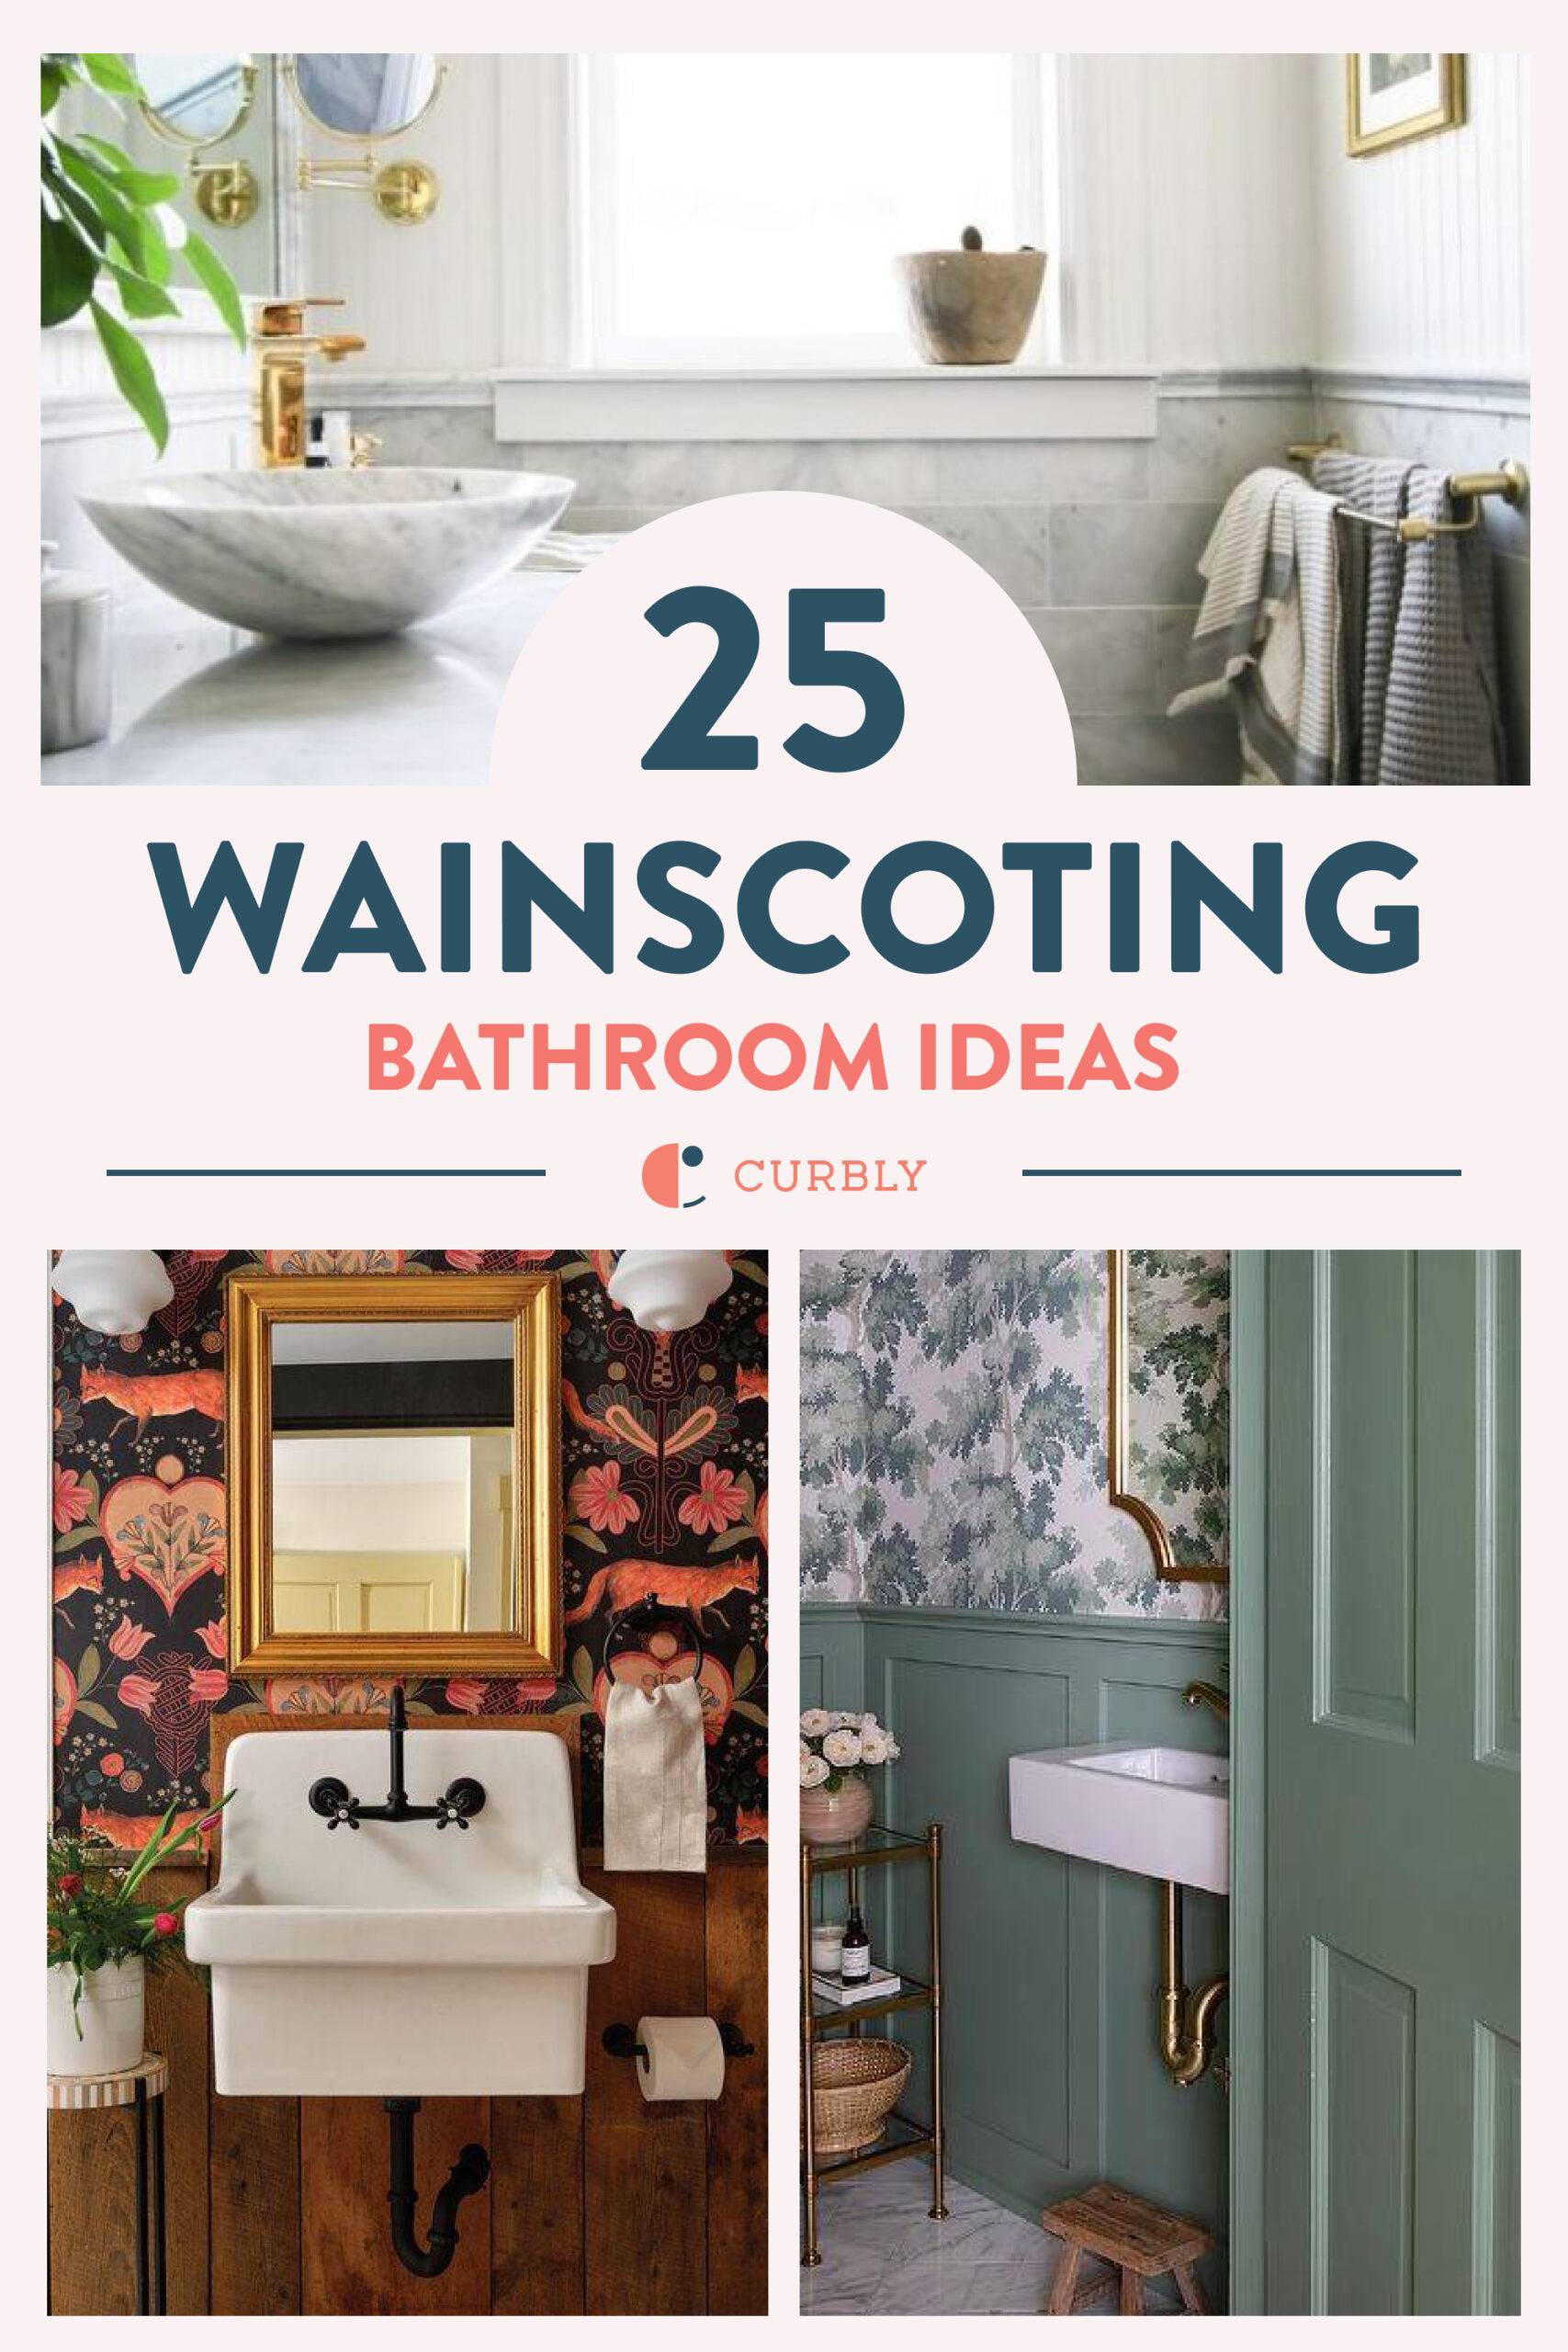 From Chic to Cozy: 25 Bathroom Wainscoting Ideas - Curbly